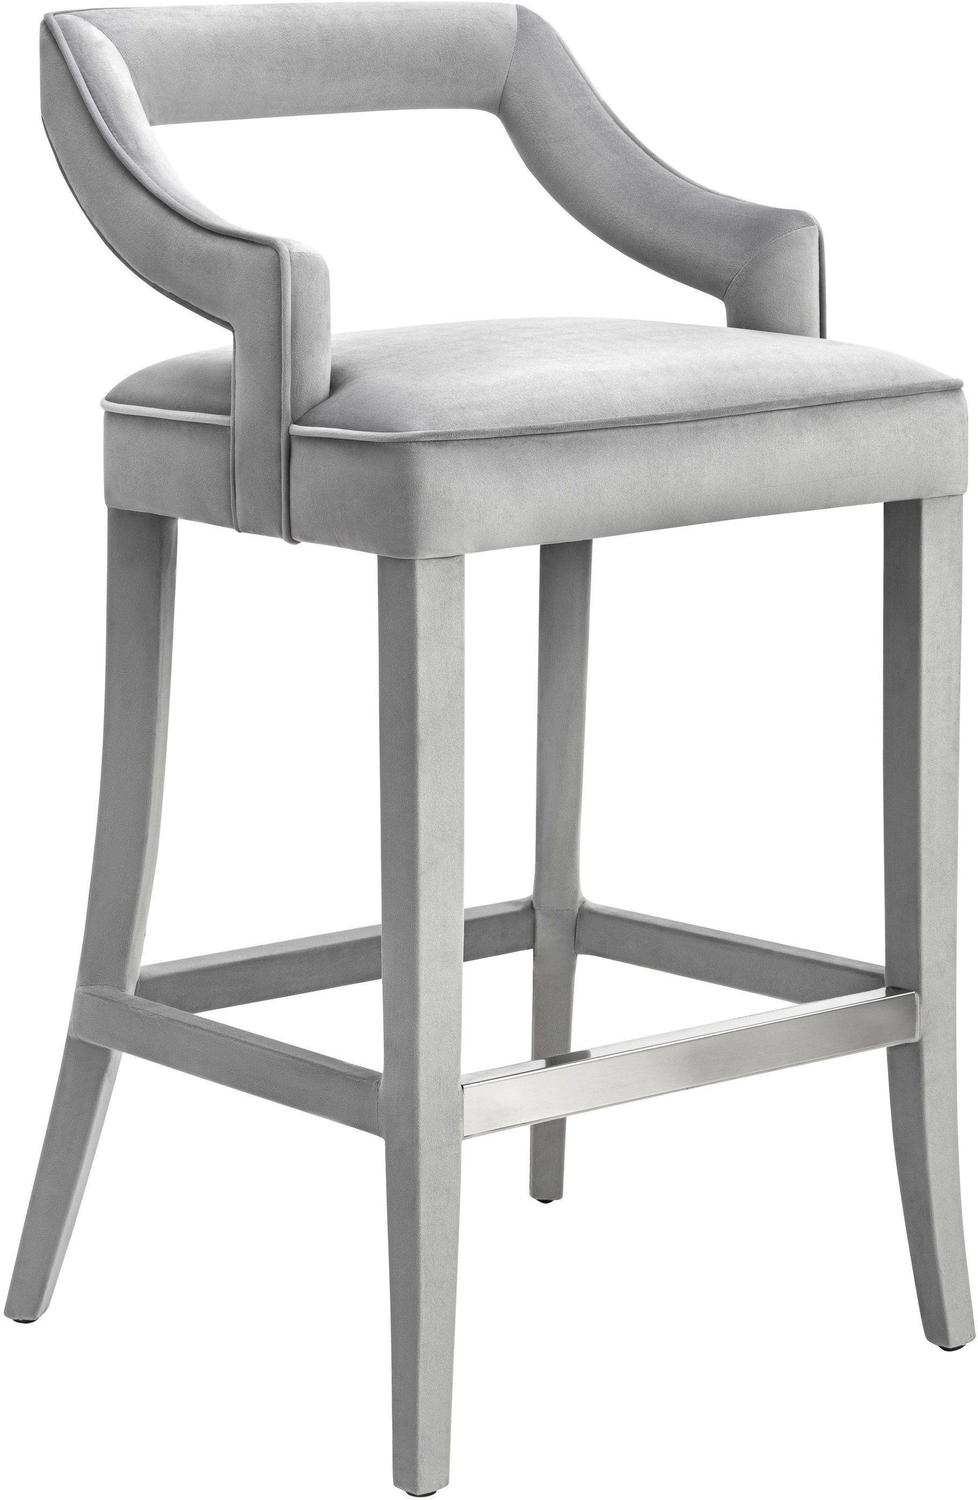 Contemporary Design Furniture Stools Bar Chairs and Stools Grey